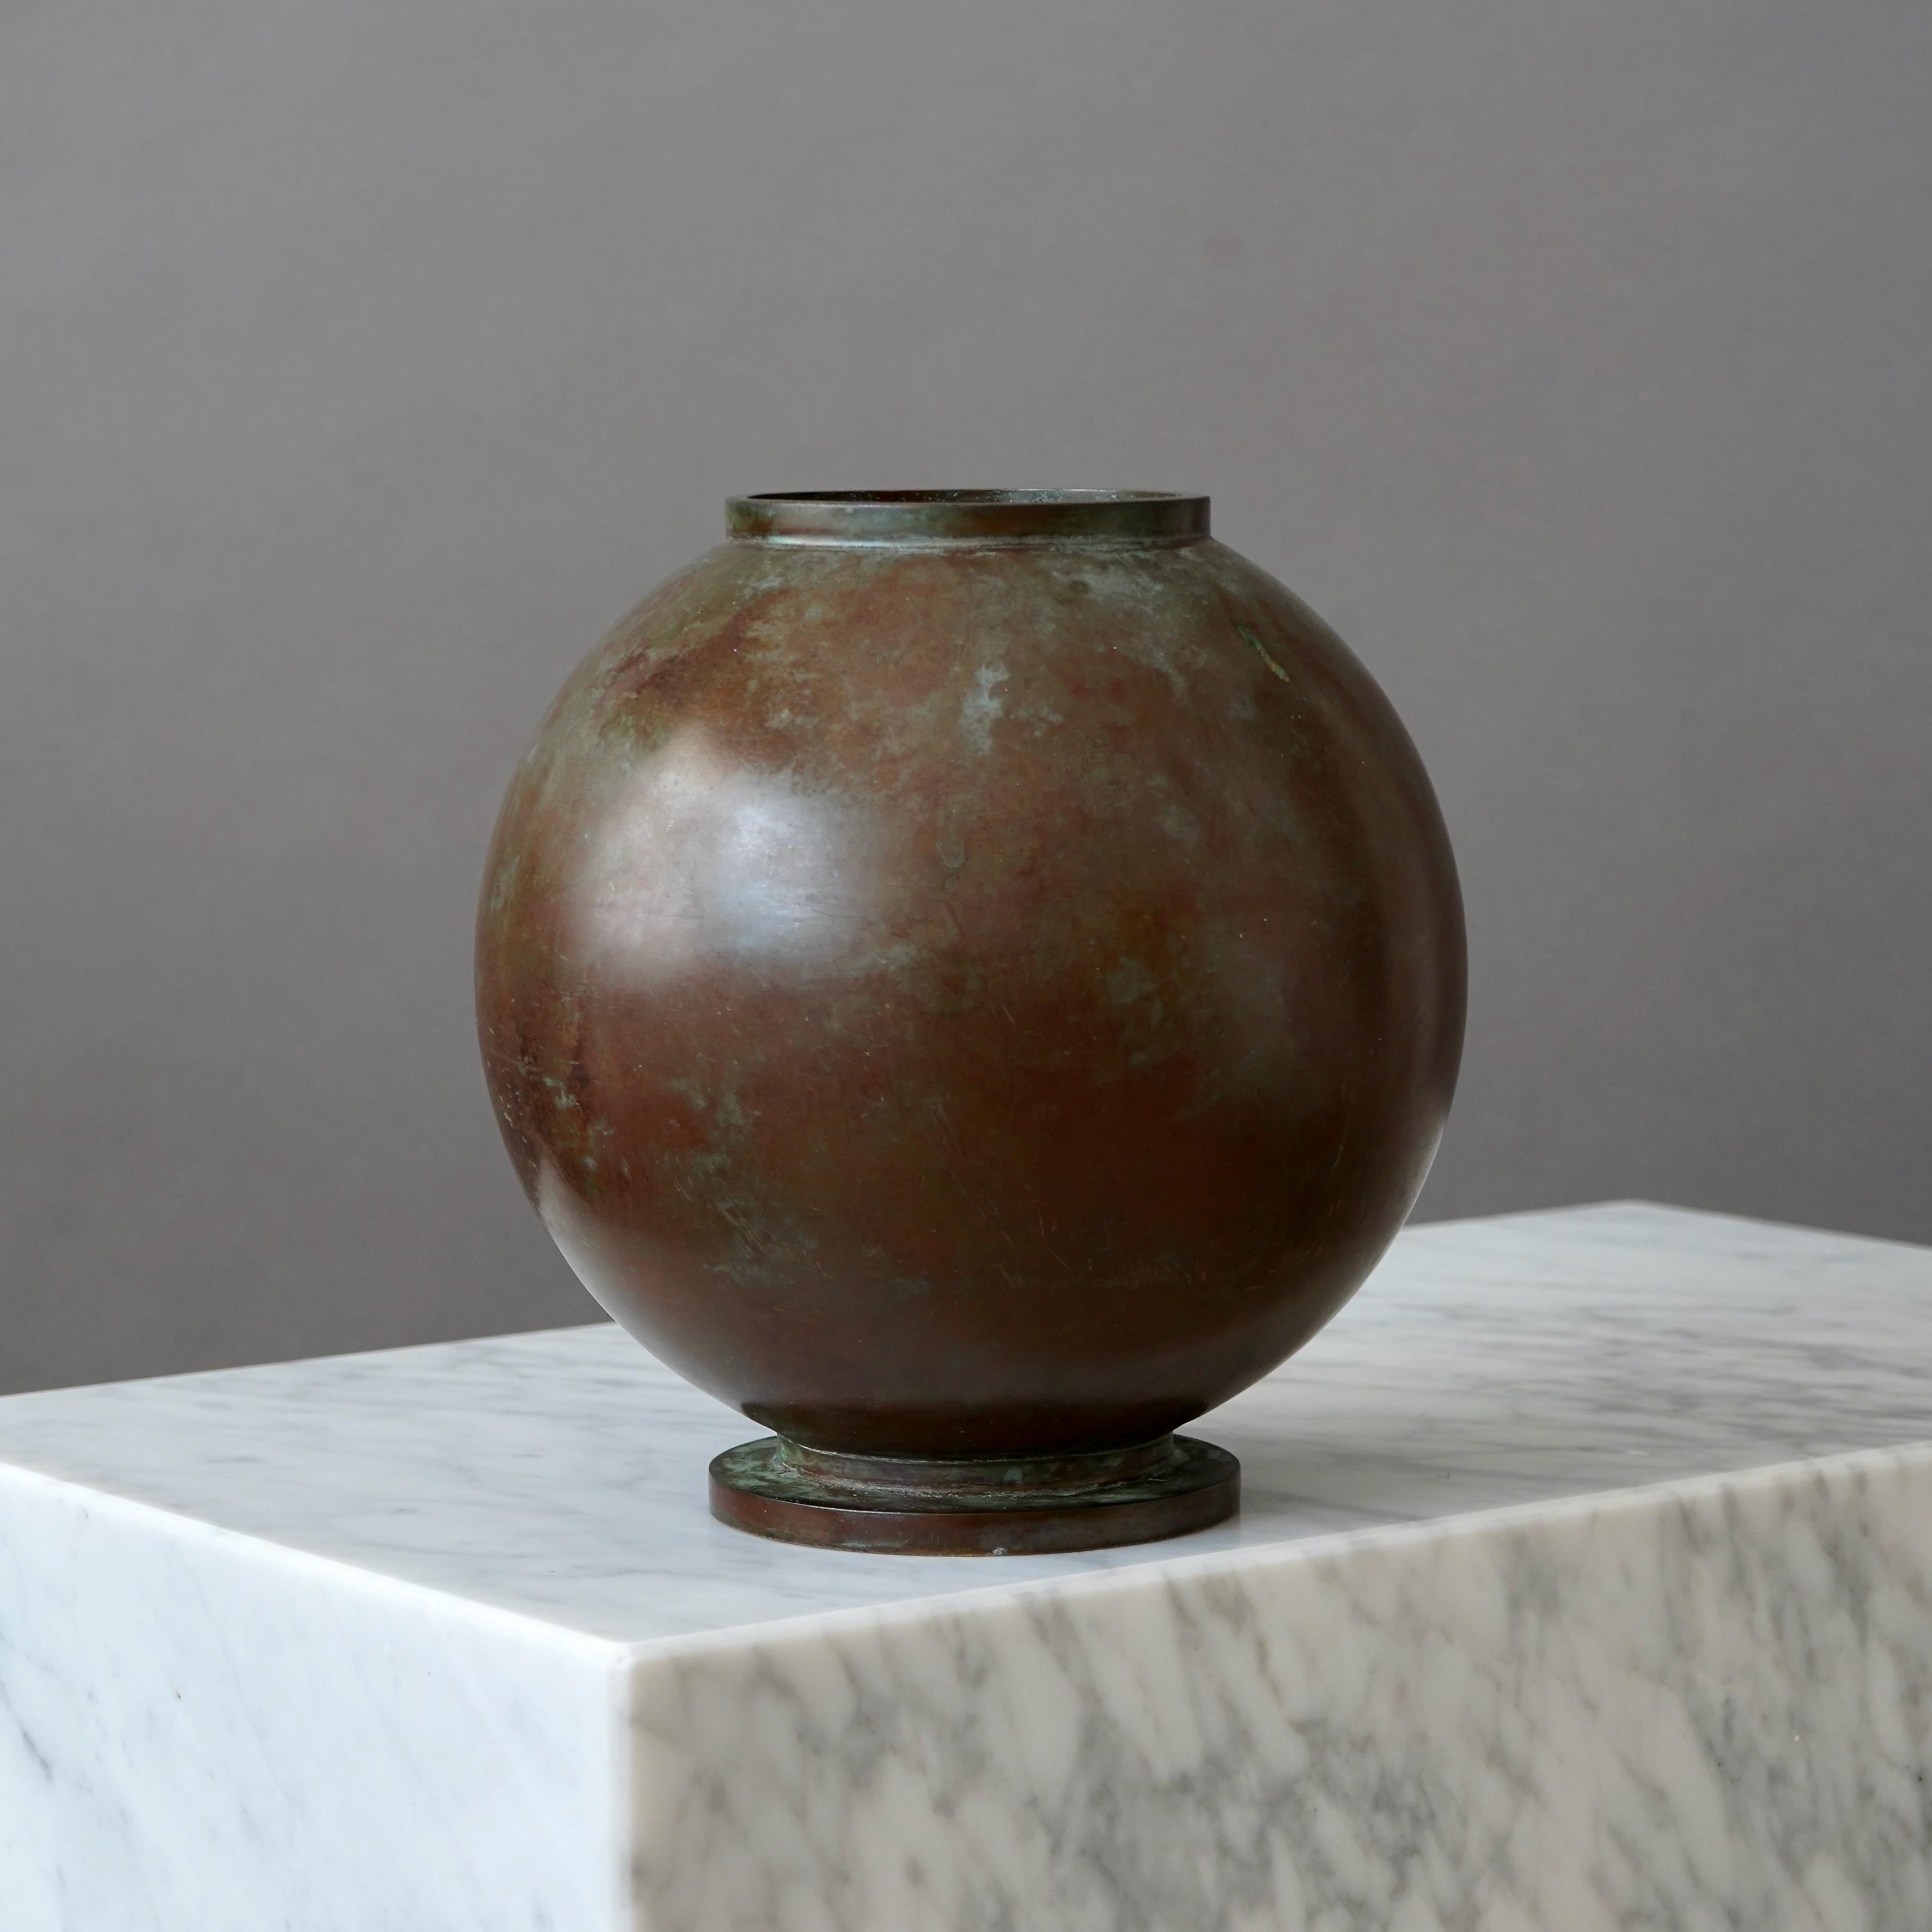 A beautiful bronze vase with amazing patina. Designed by Sune Bäckström in Malmoe, Sweden, 1920s.  

Great condition, but with some scratches on the surface.
Stamped 'BRONS', model number '9104' and signature 'Sune Bäckström'.

Produced by Einar